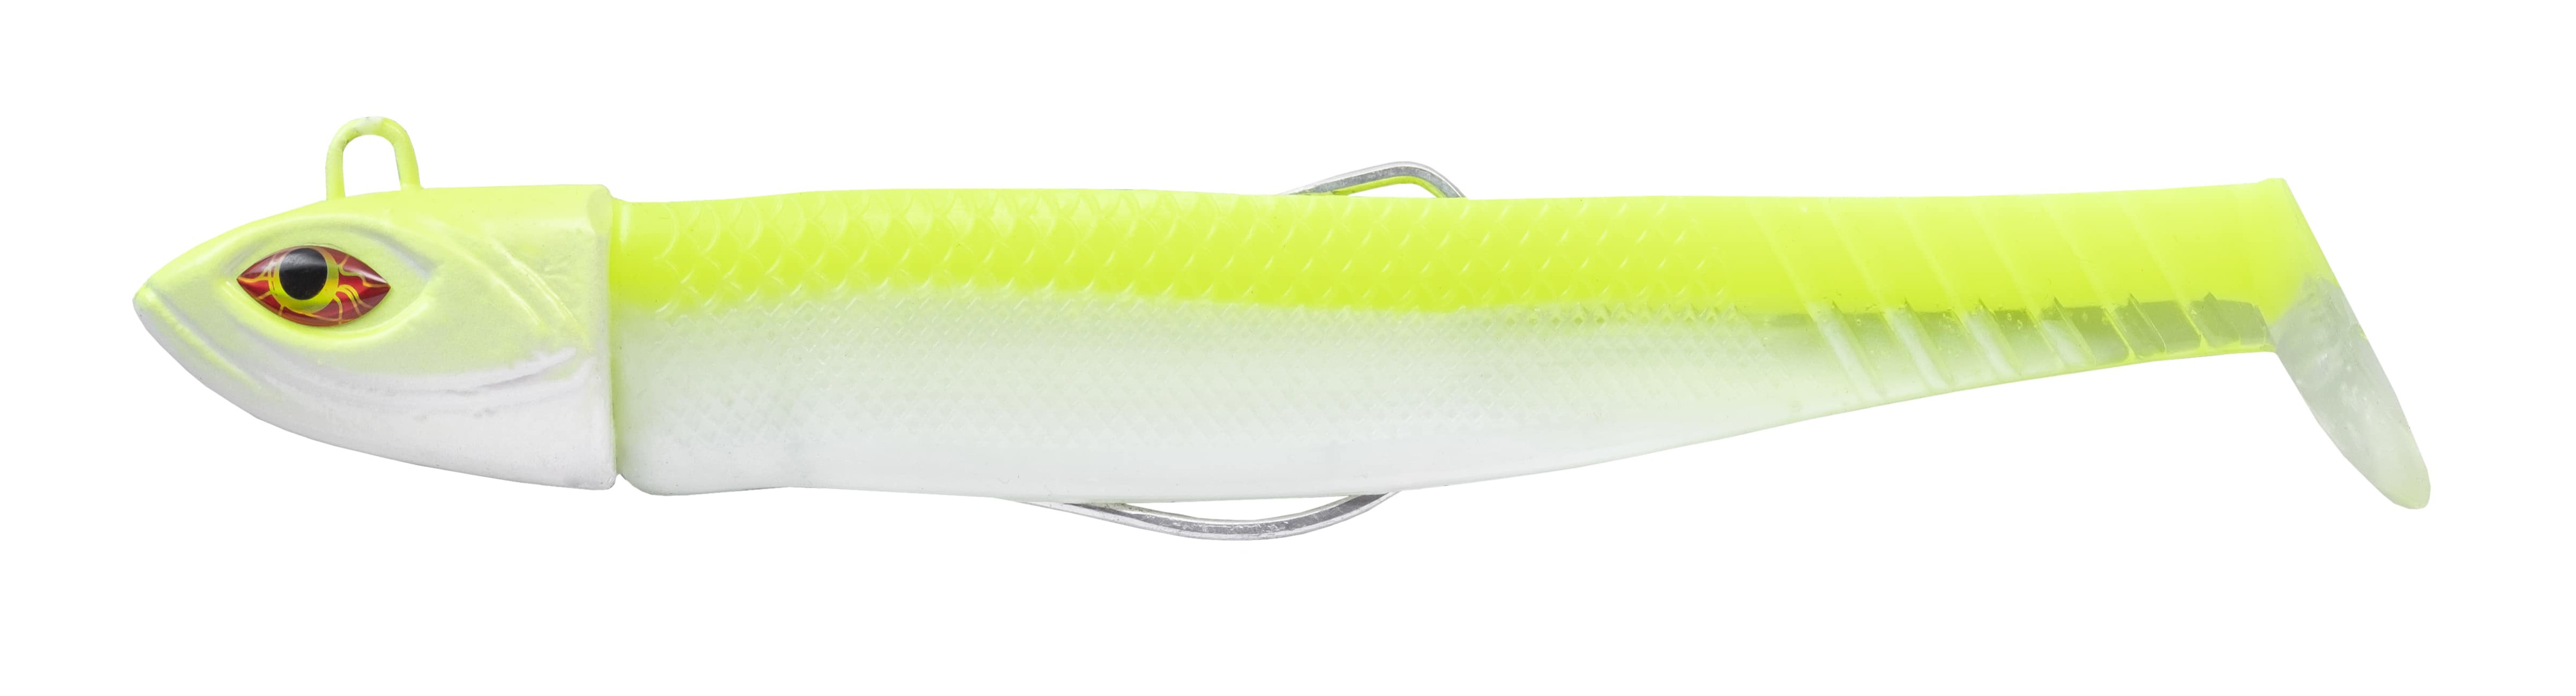 Cinnetic Crafty Candy Shad 10.5cm (25g) (2 stuks) - White Chartreuse